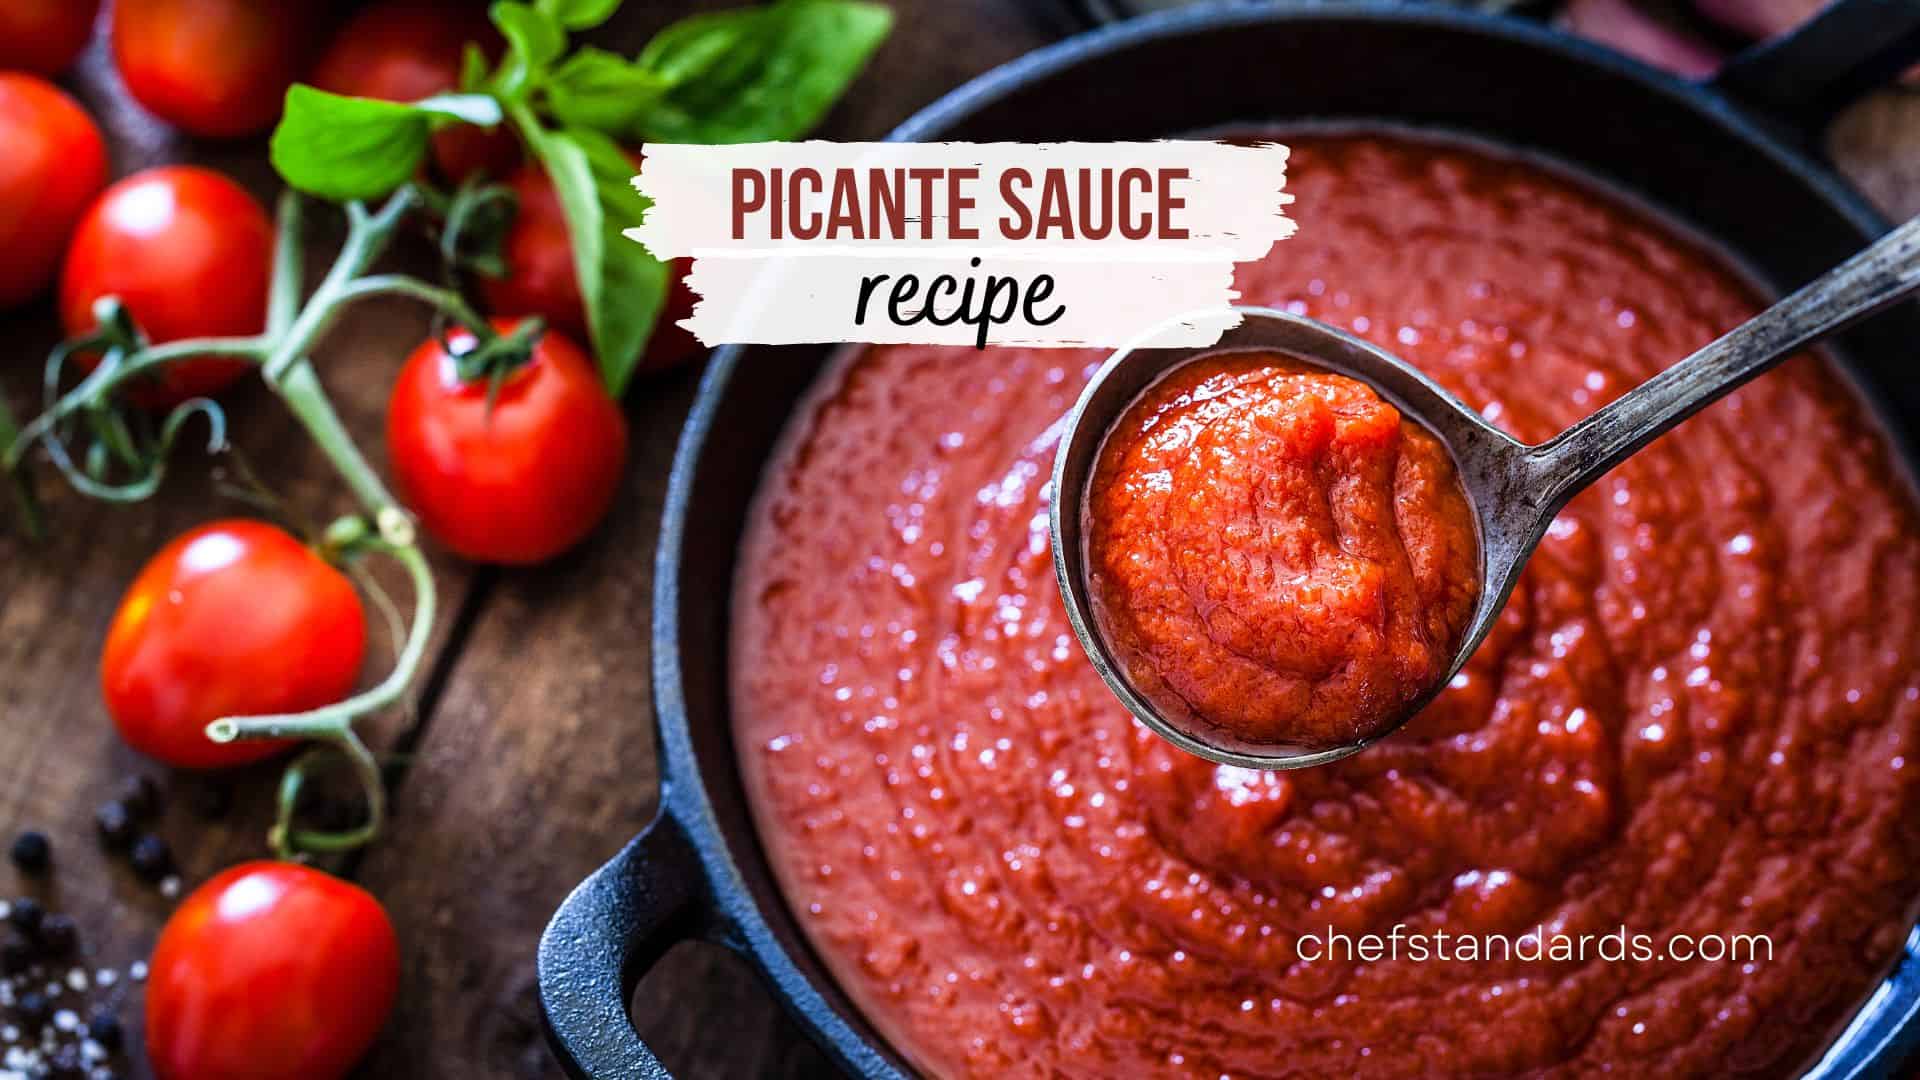 Picante sauce with vegetables on table